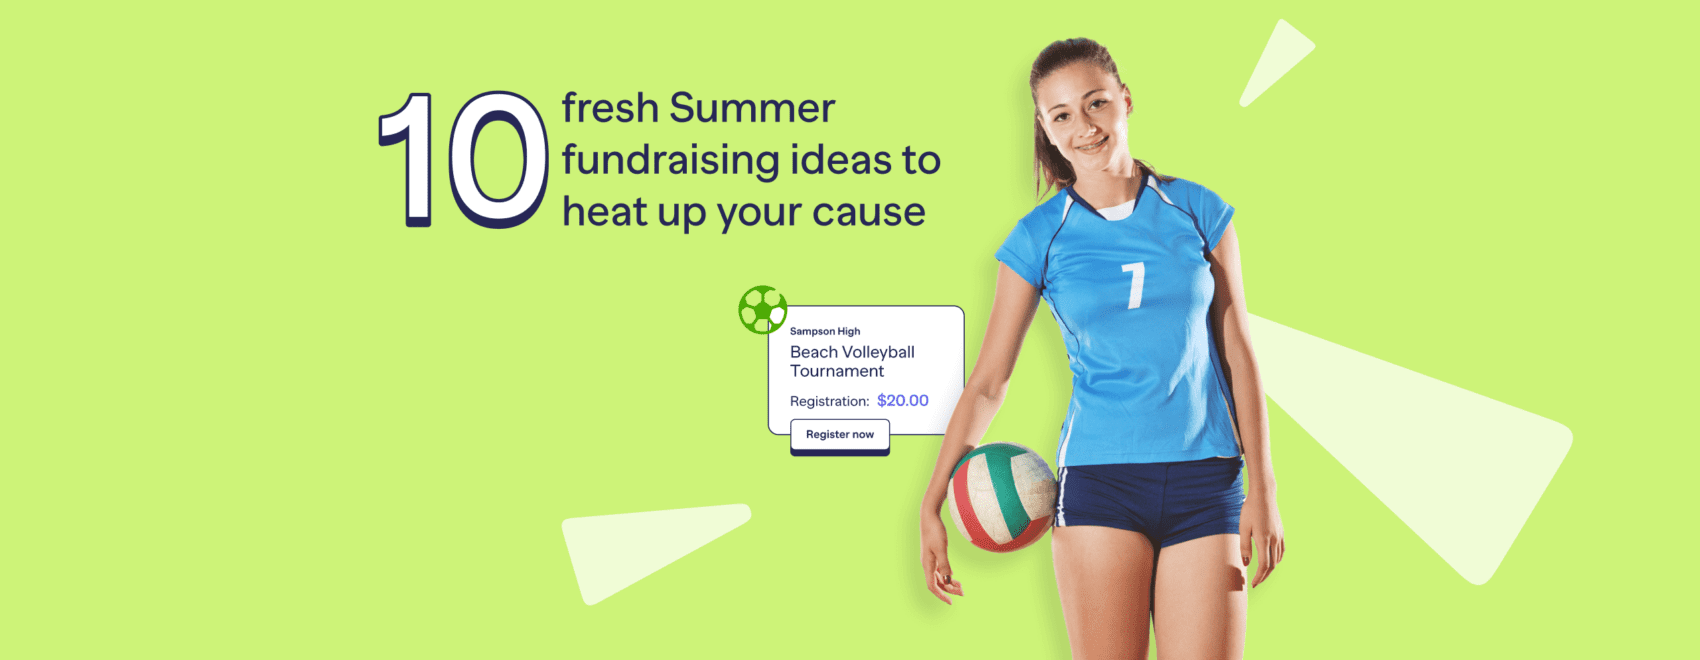 10 fresh Summer fundraising ideas to heat up your cause